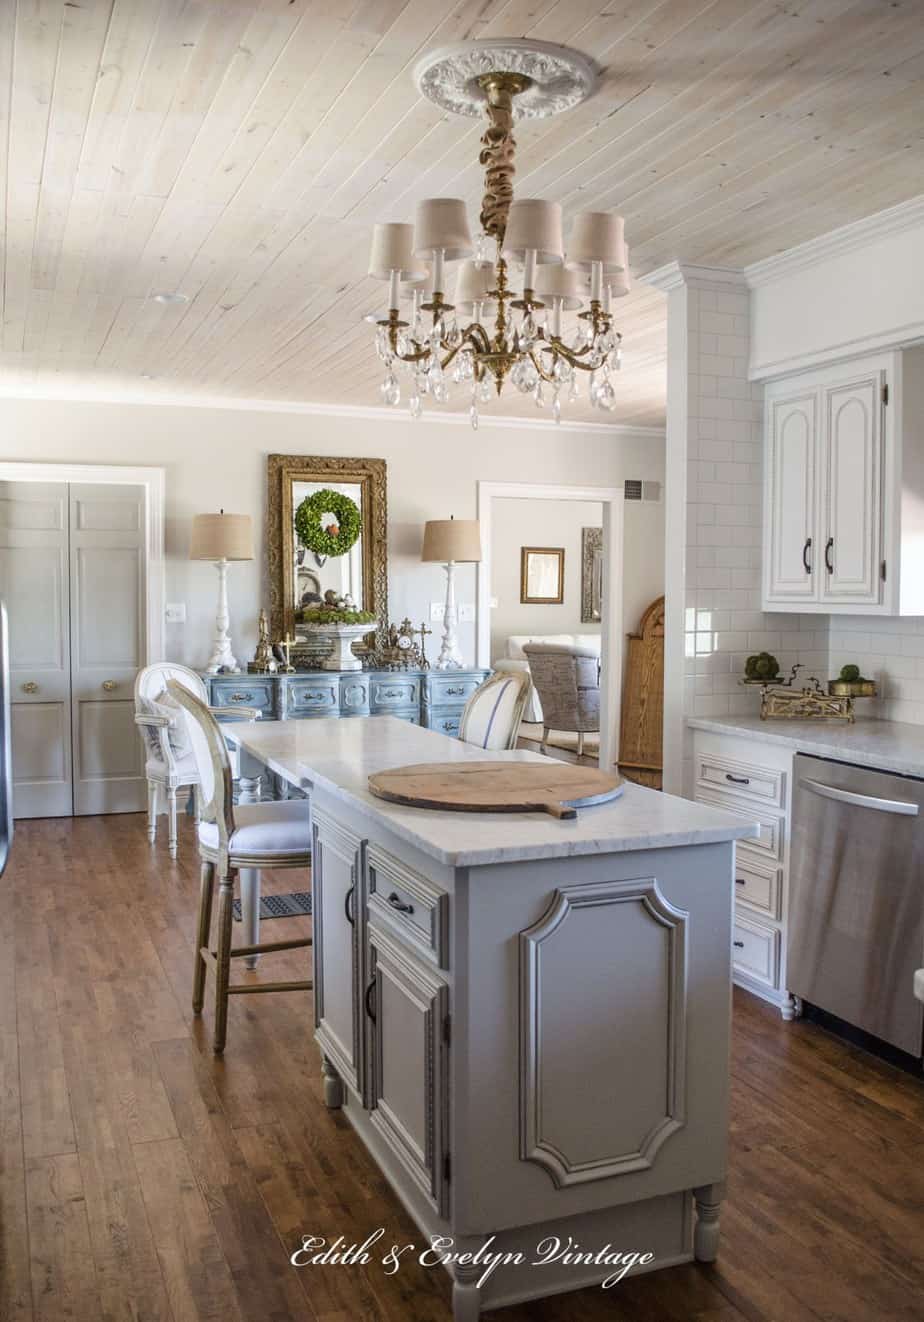 Love this beautiful home that's decorated in vintage French chateau style!